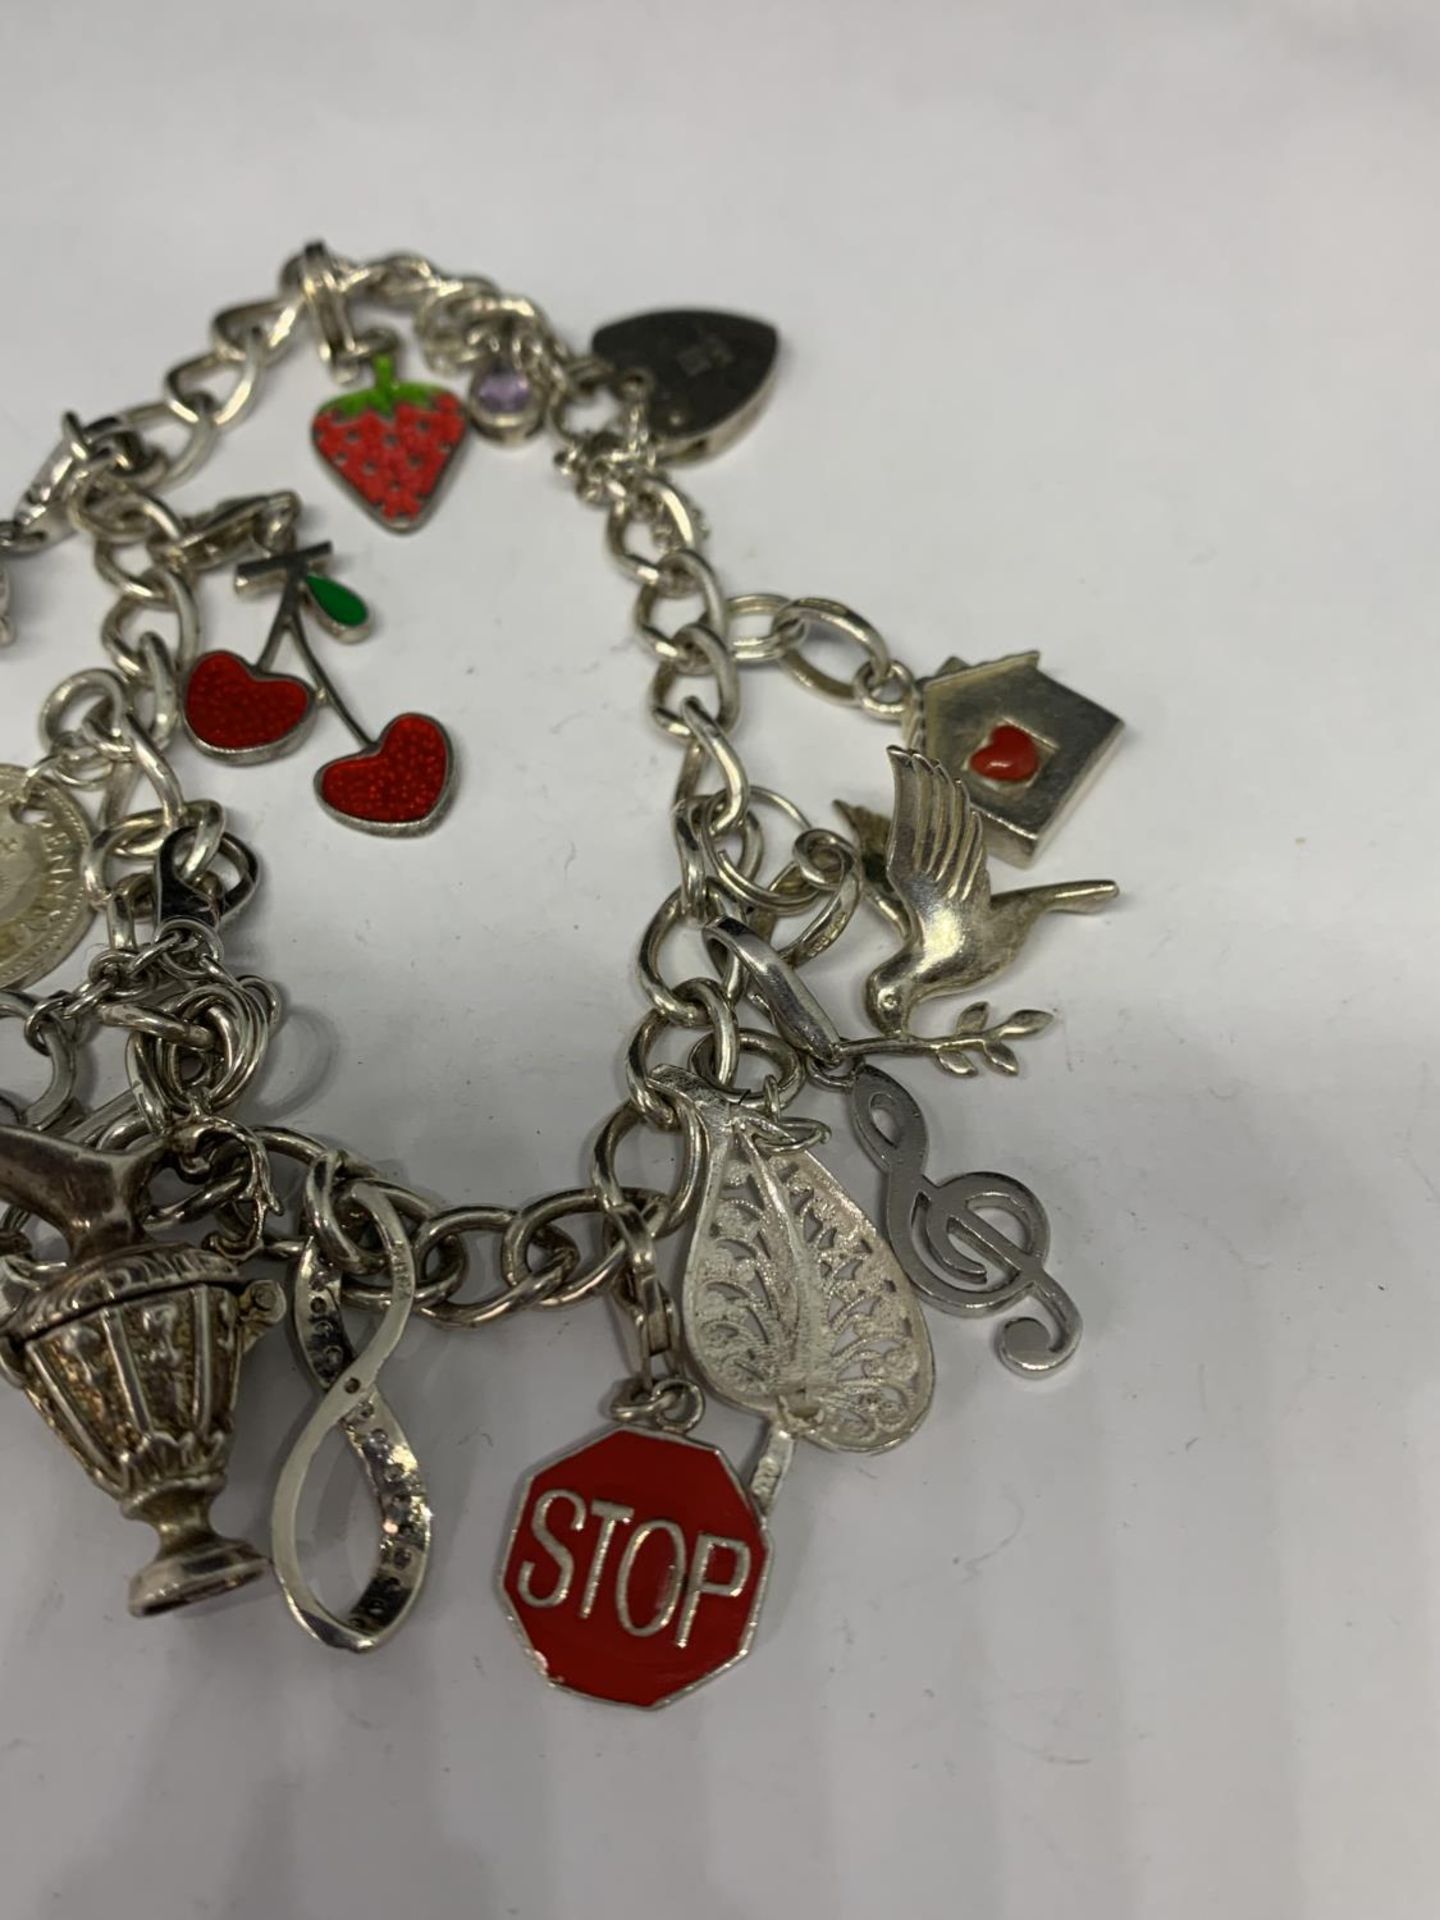 A HEAVY SILVER CHARM BRACELET WITH THIRTEEN CHARMS TO INCLUDE A STRAWBERRY, CHERRIES, DOVE ETC - Image 4 of 4